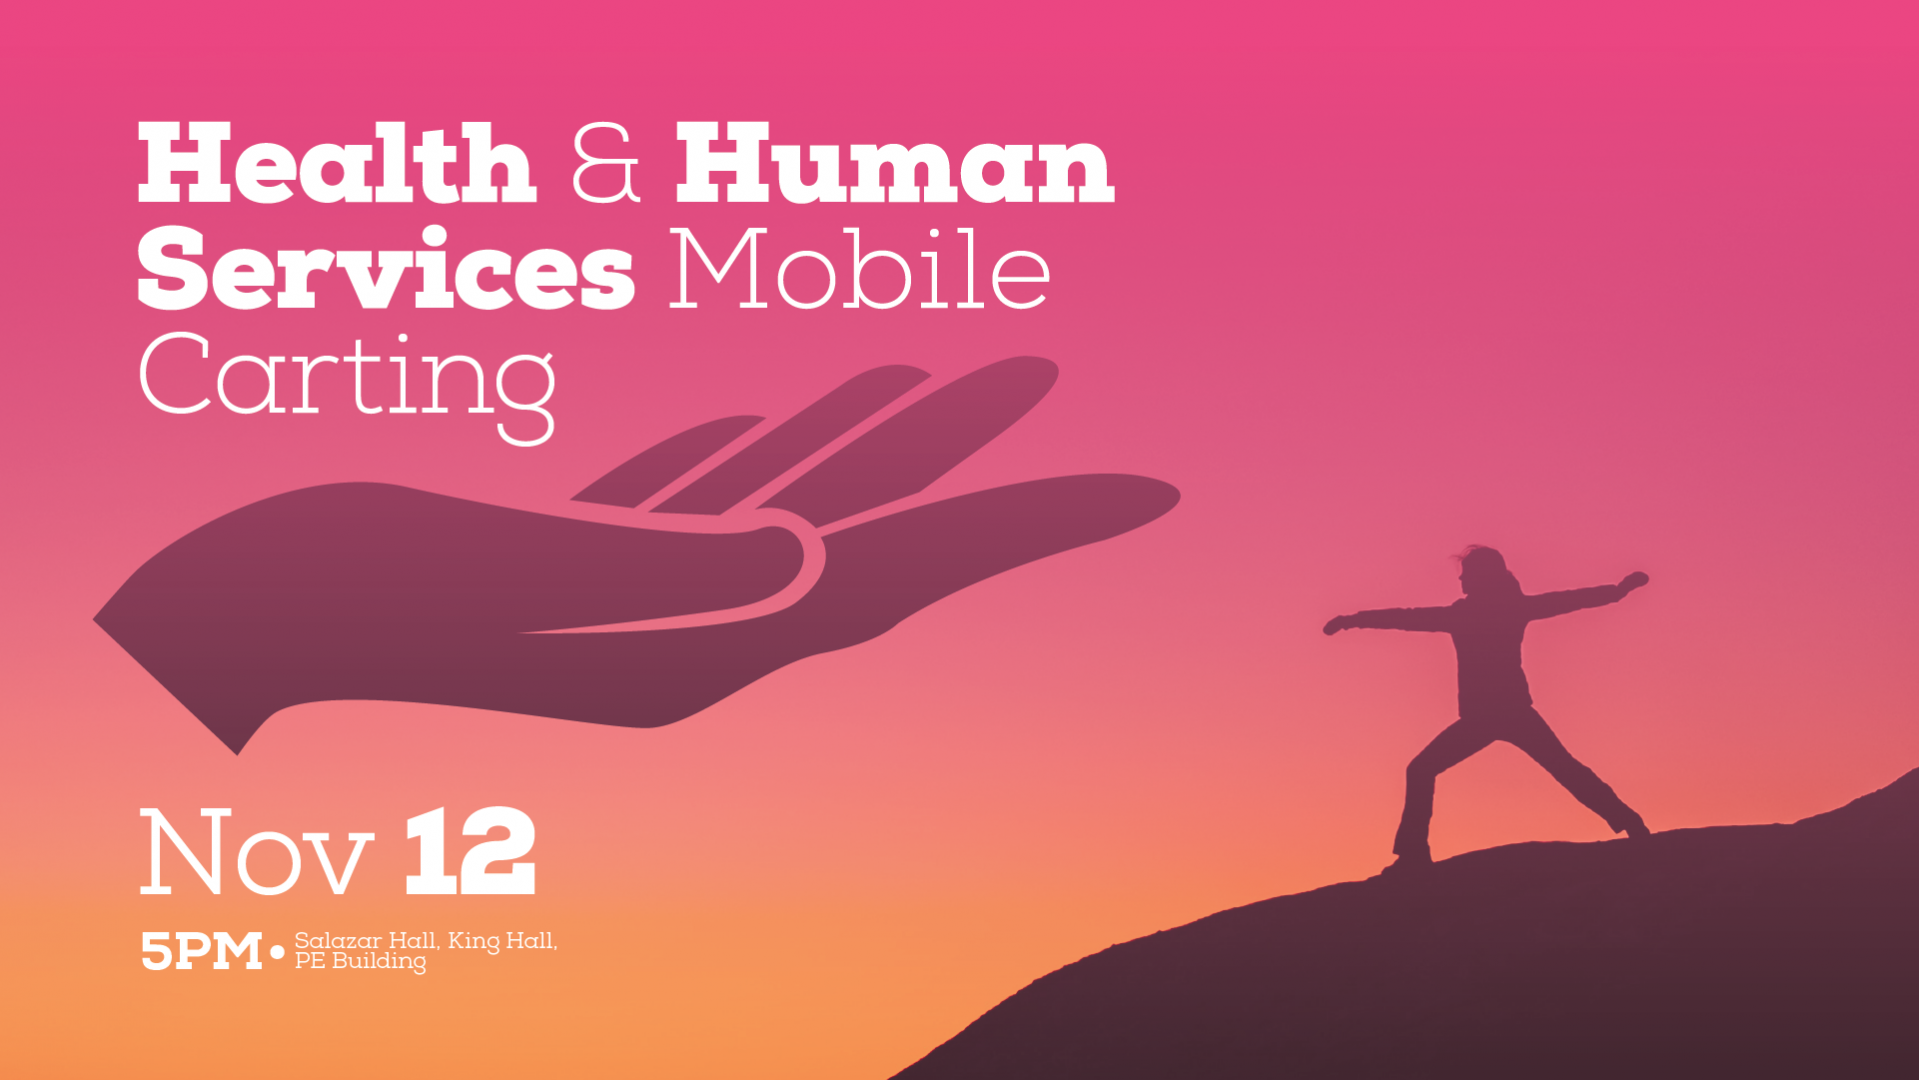 Health & Human Services Mobile Carting